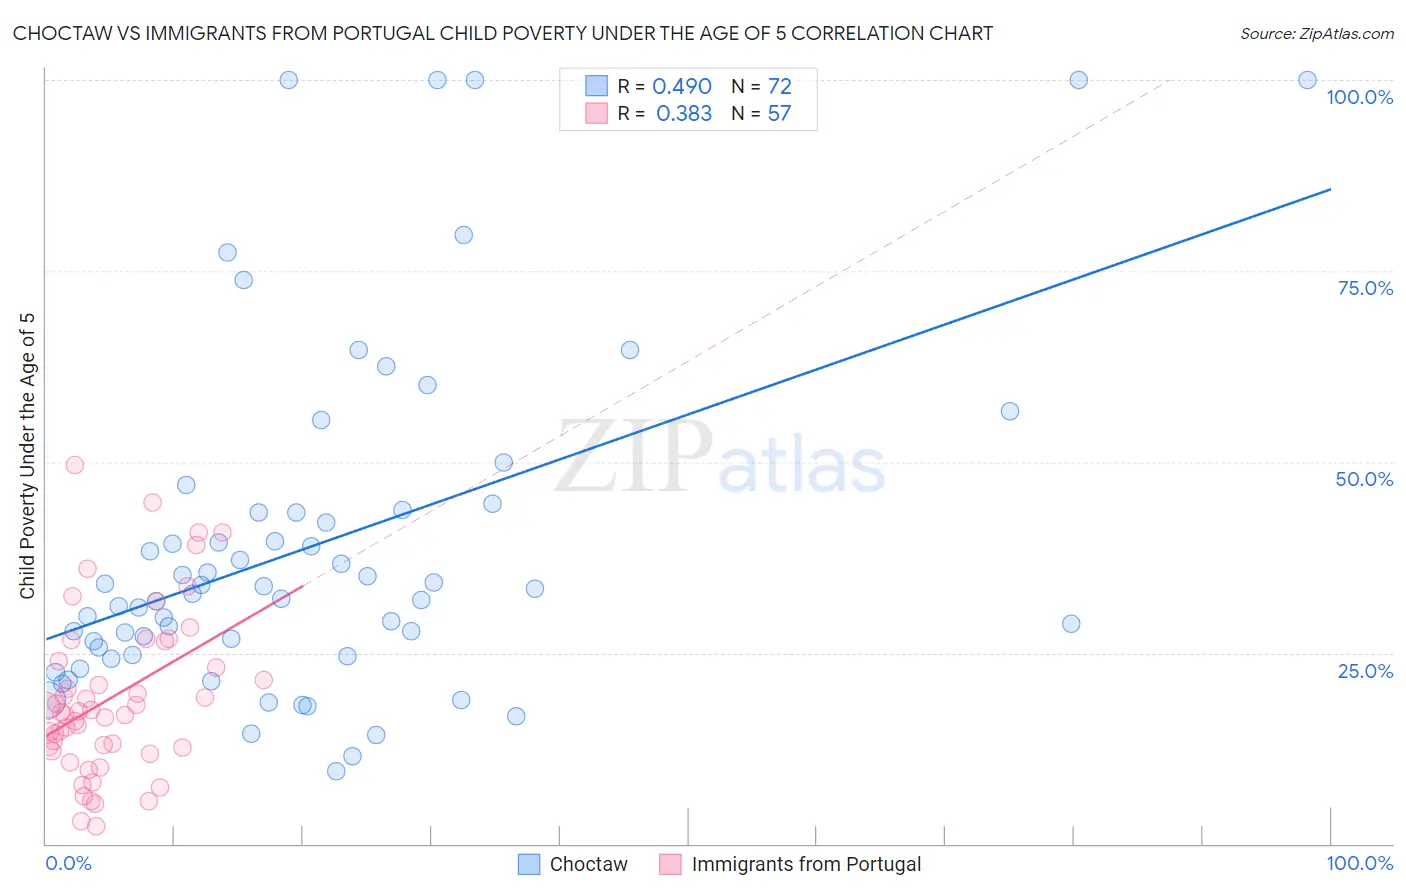 Choctaw vs Immigrants from Portugal Child Poverty Under the Age of 5